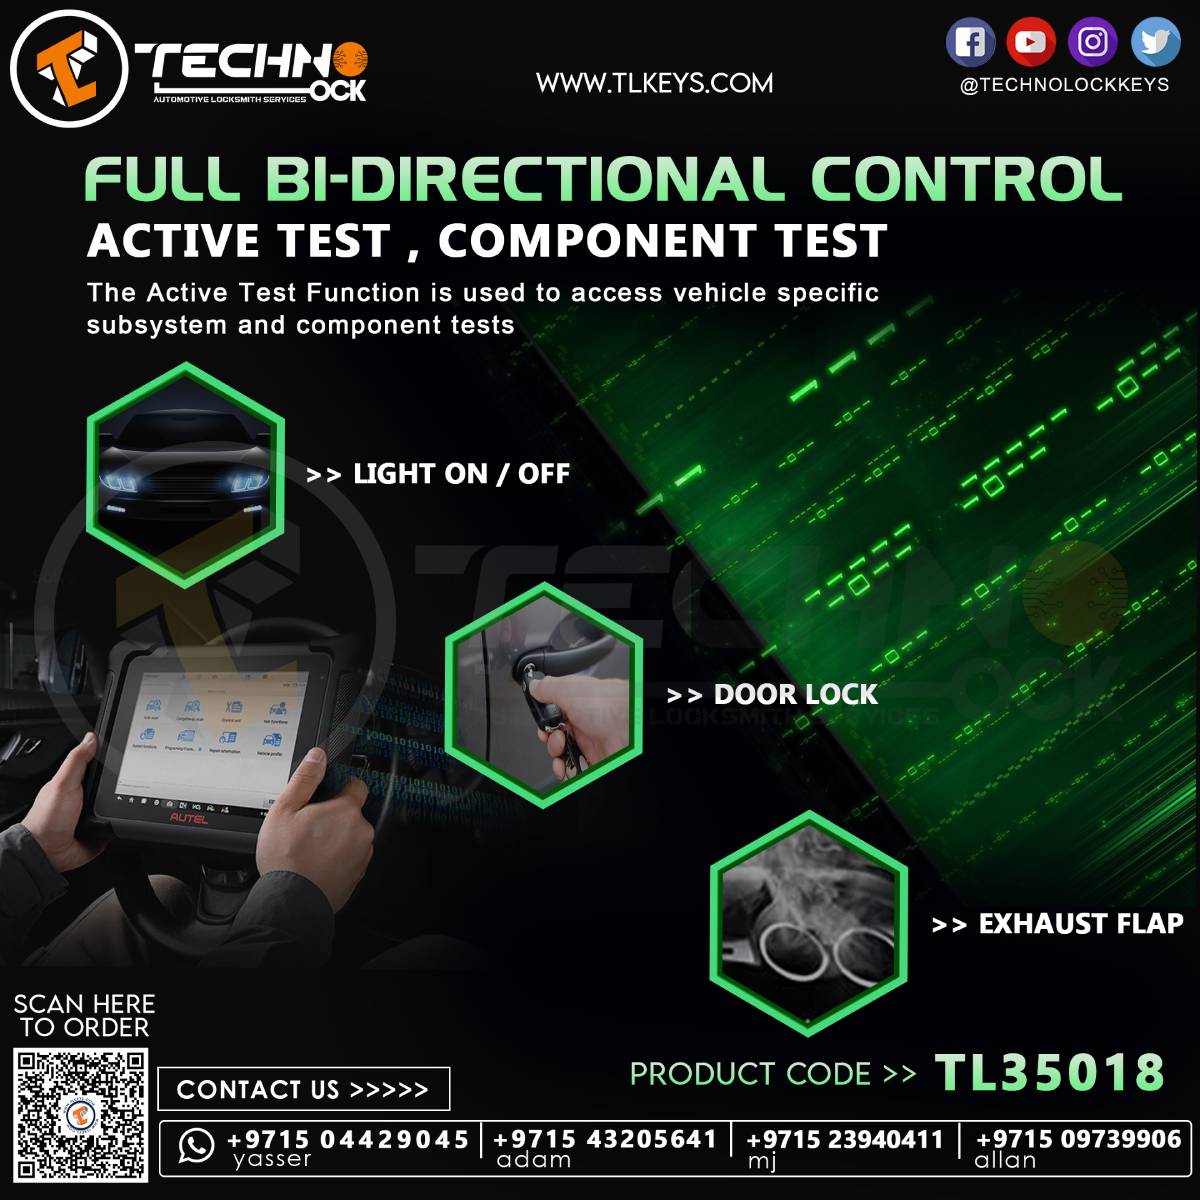  FULL BI-DIRECTIONAL CONTROL ACTIVE TEST, COMPONENT TEST